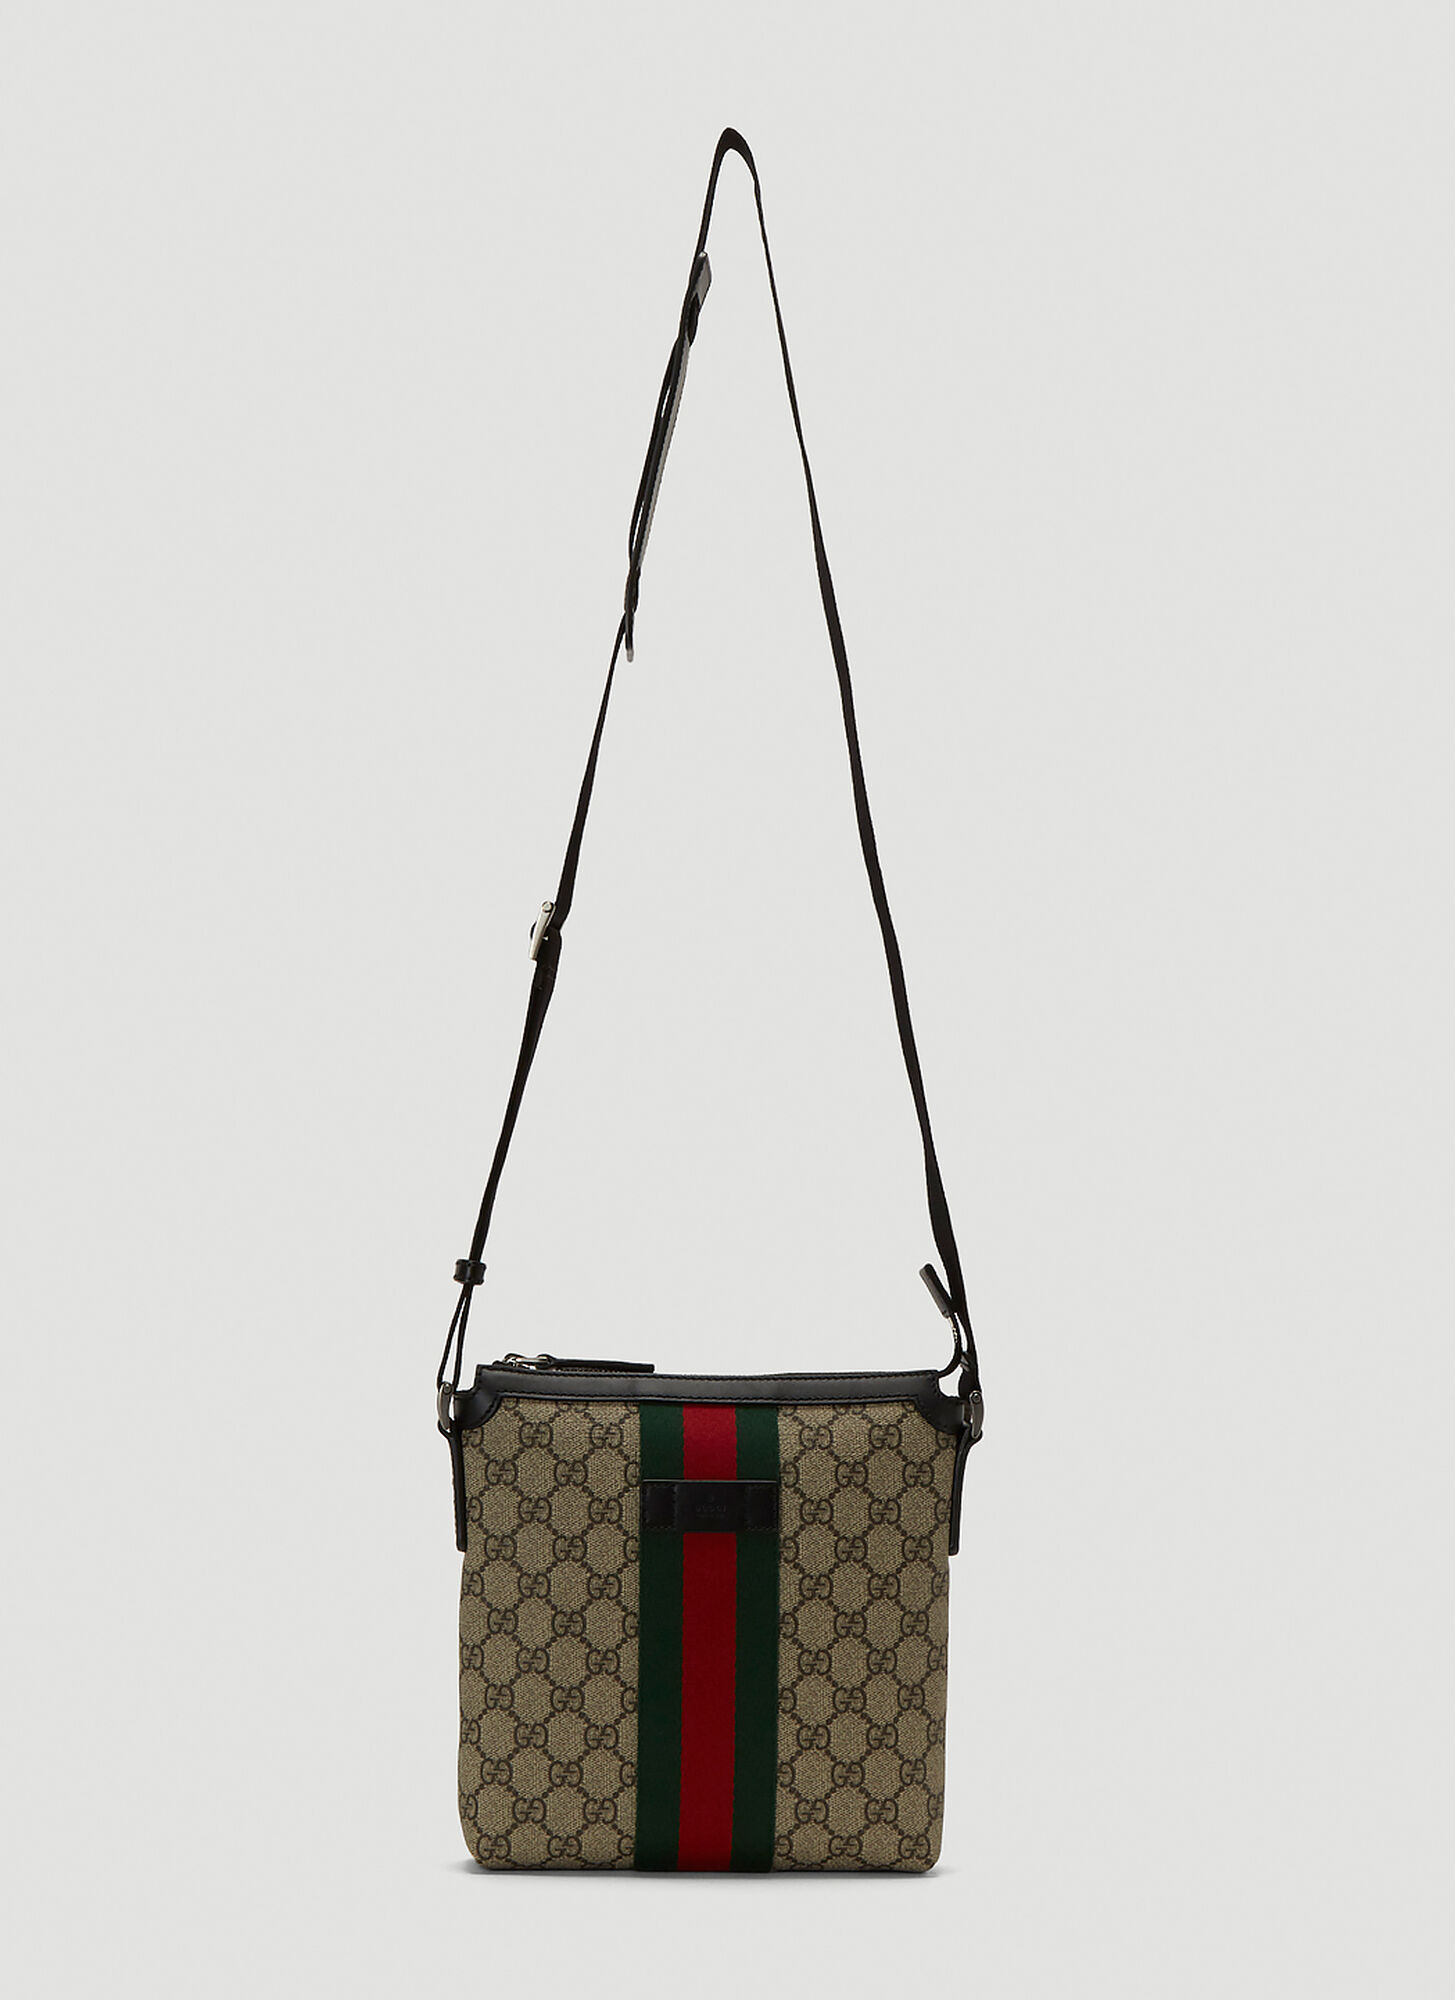 Gucci GG Crossbody Bag in Beige size One Size | The Fashionisto